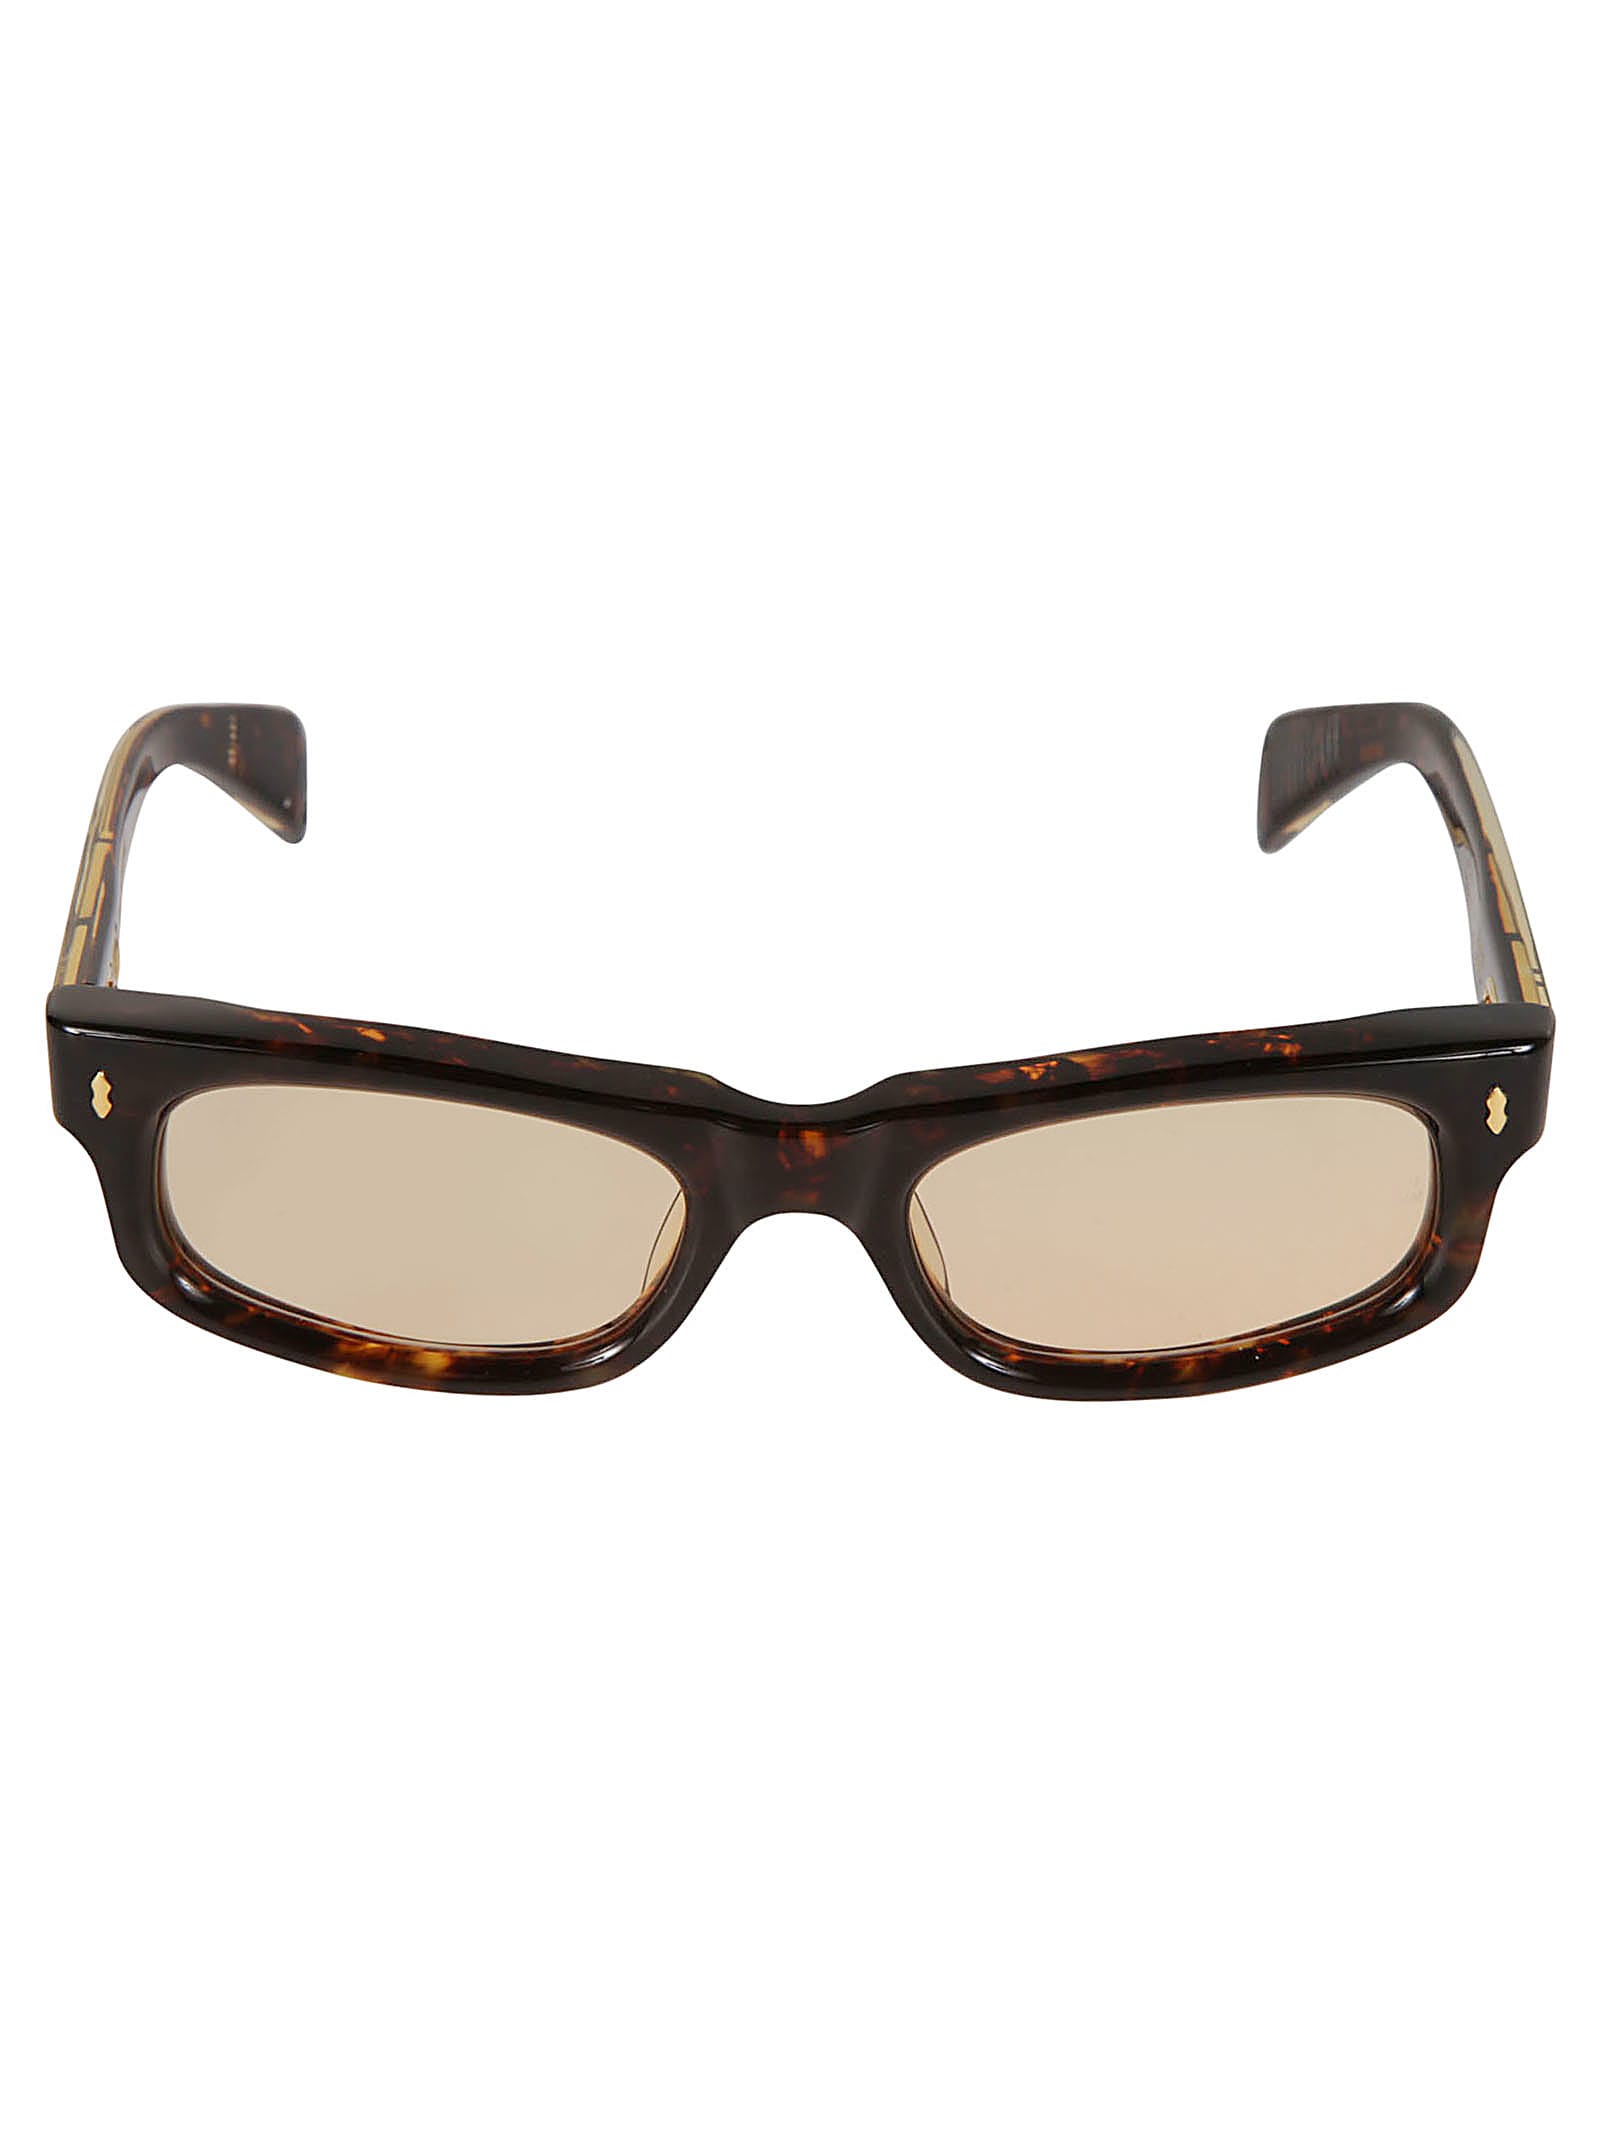 Jacques Marie Mage Initials Frame In Brown